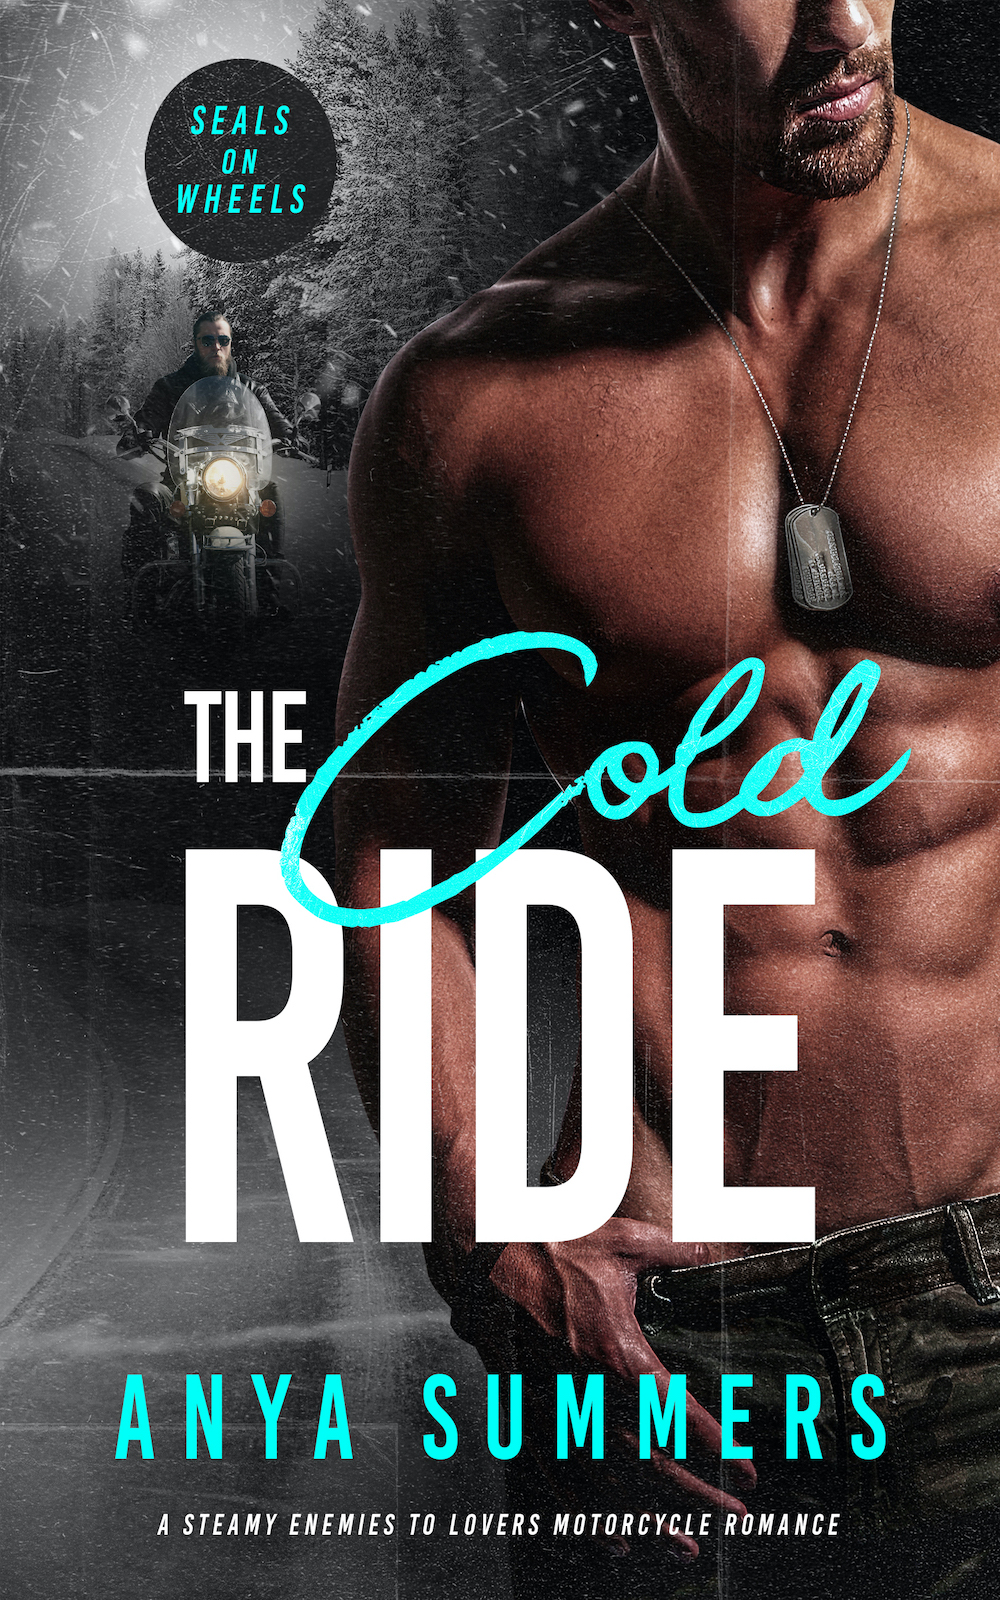 COVER REVEAL: THE COLD RIDE BY ANYA SUMMERS BOOK #2 IN SEALs ON WHEELS SERIES